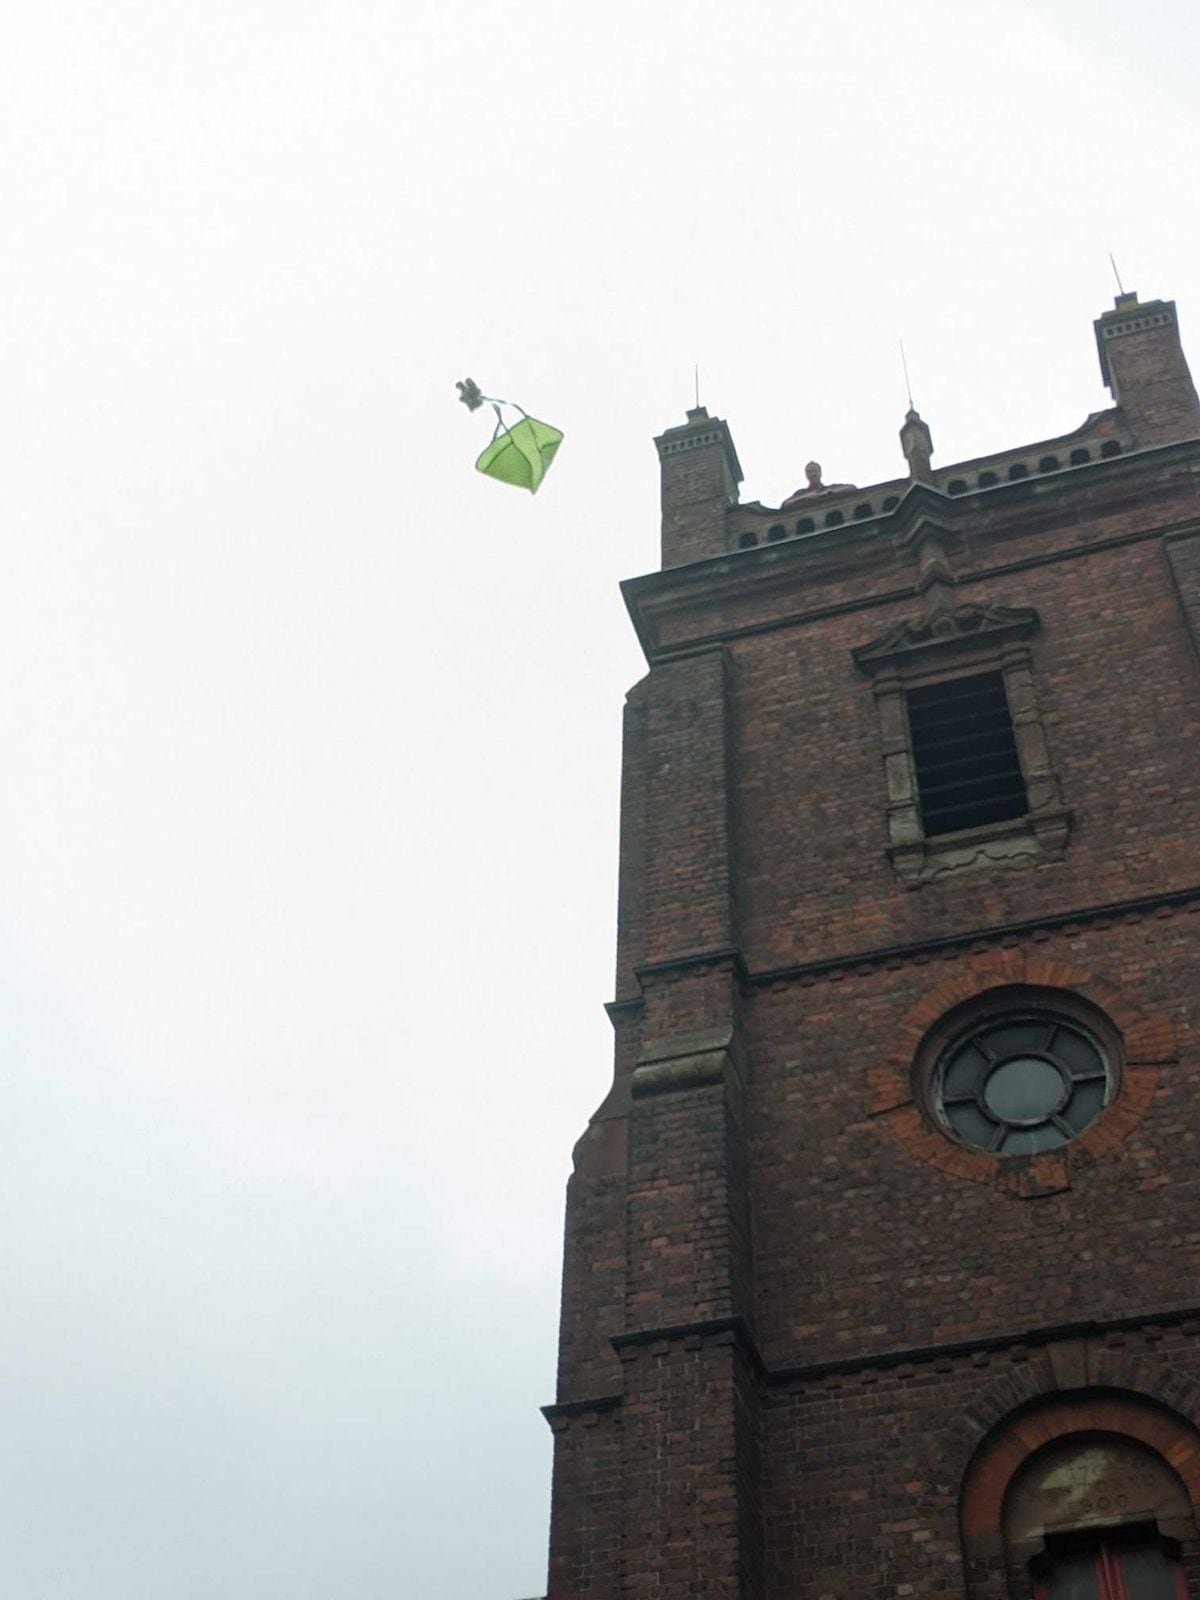 One of the parachuting Teddies at St Michael's Church